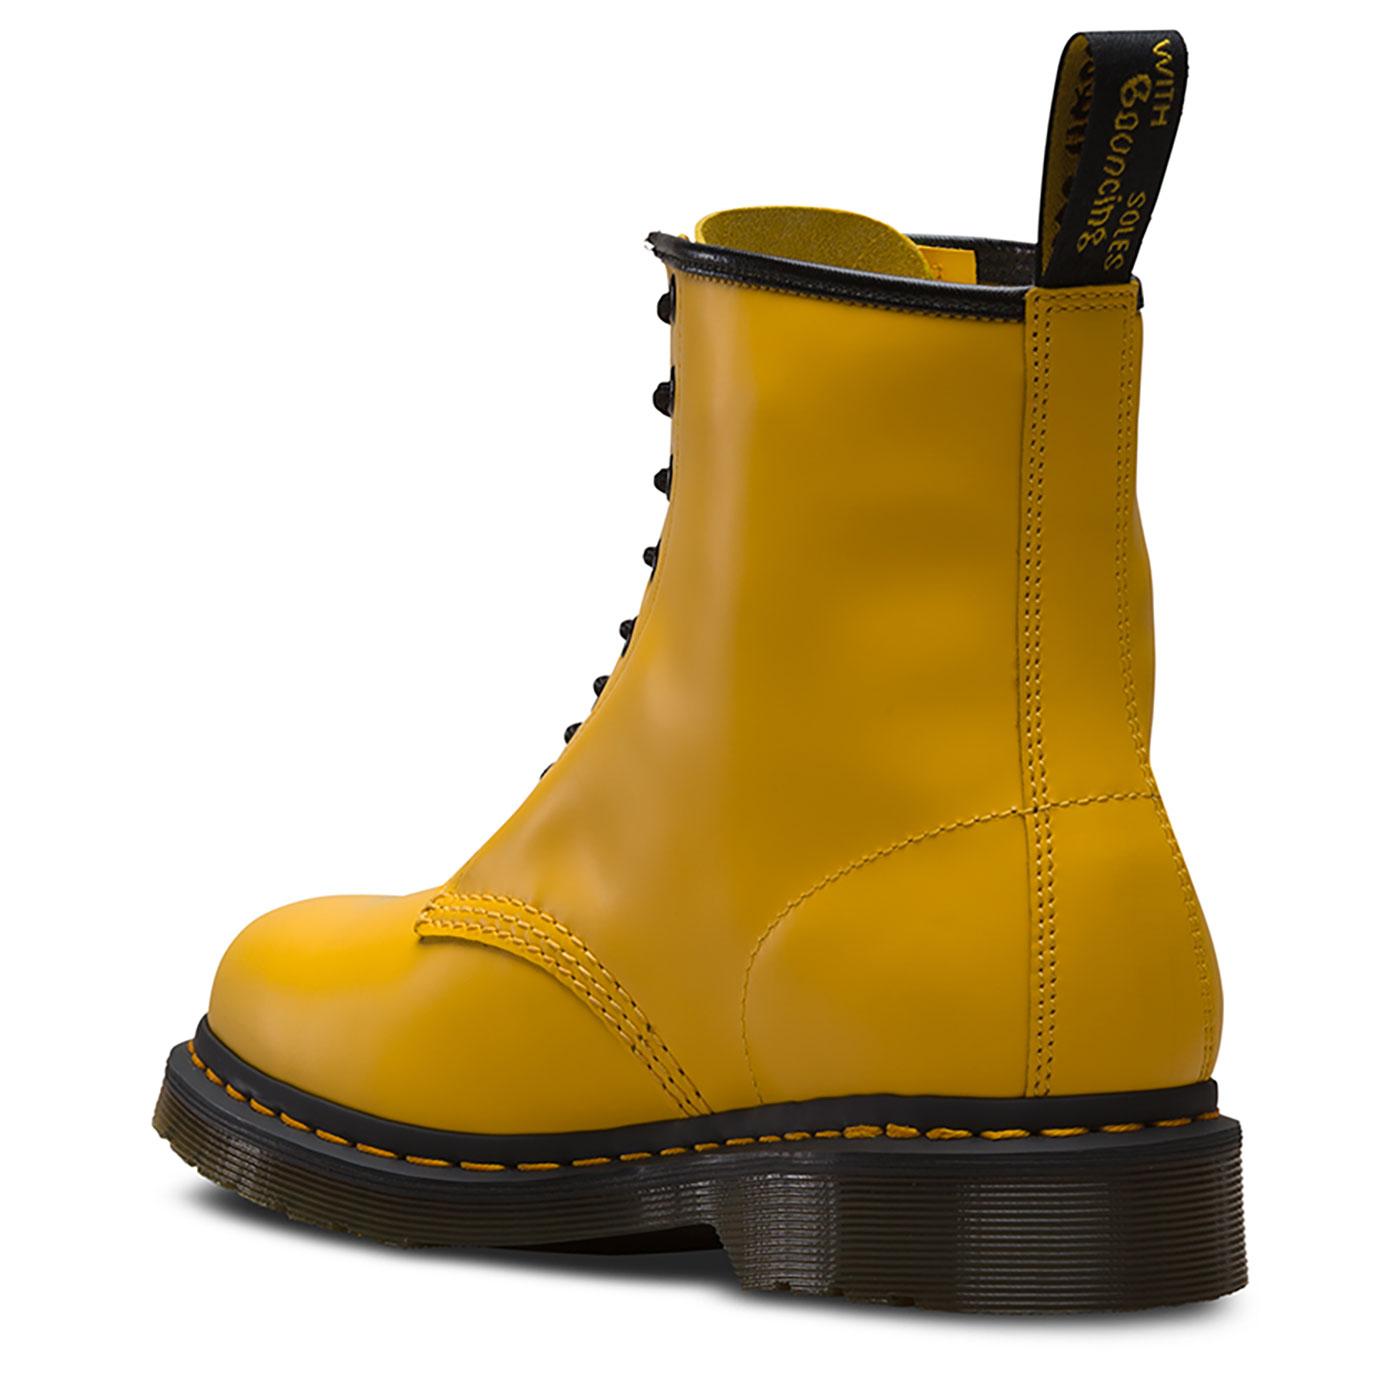 DR MARTENS '1460 Colour Pop' Retro Smooth Boots in Yellow